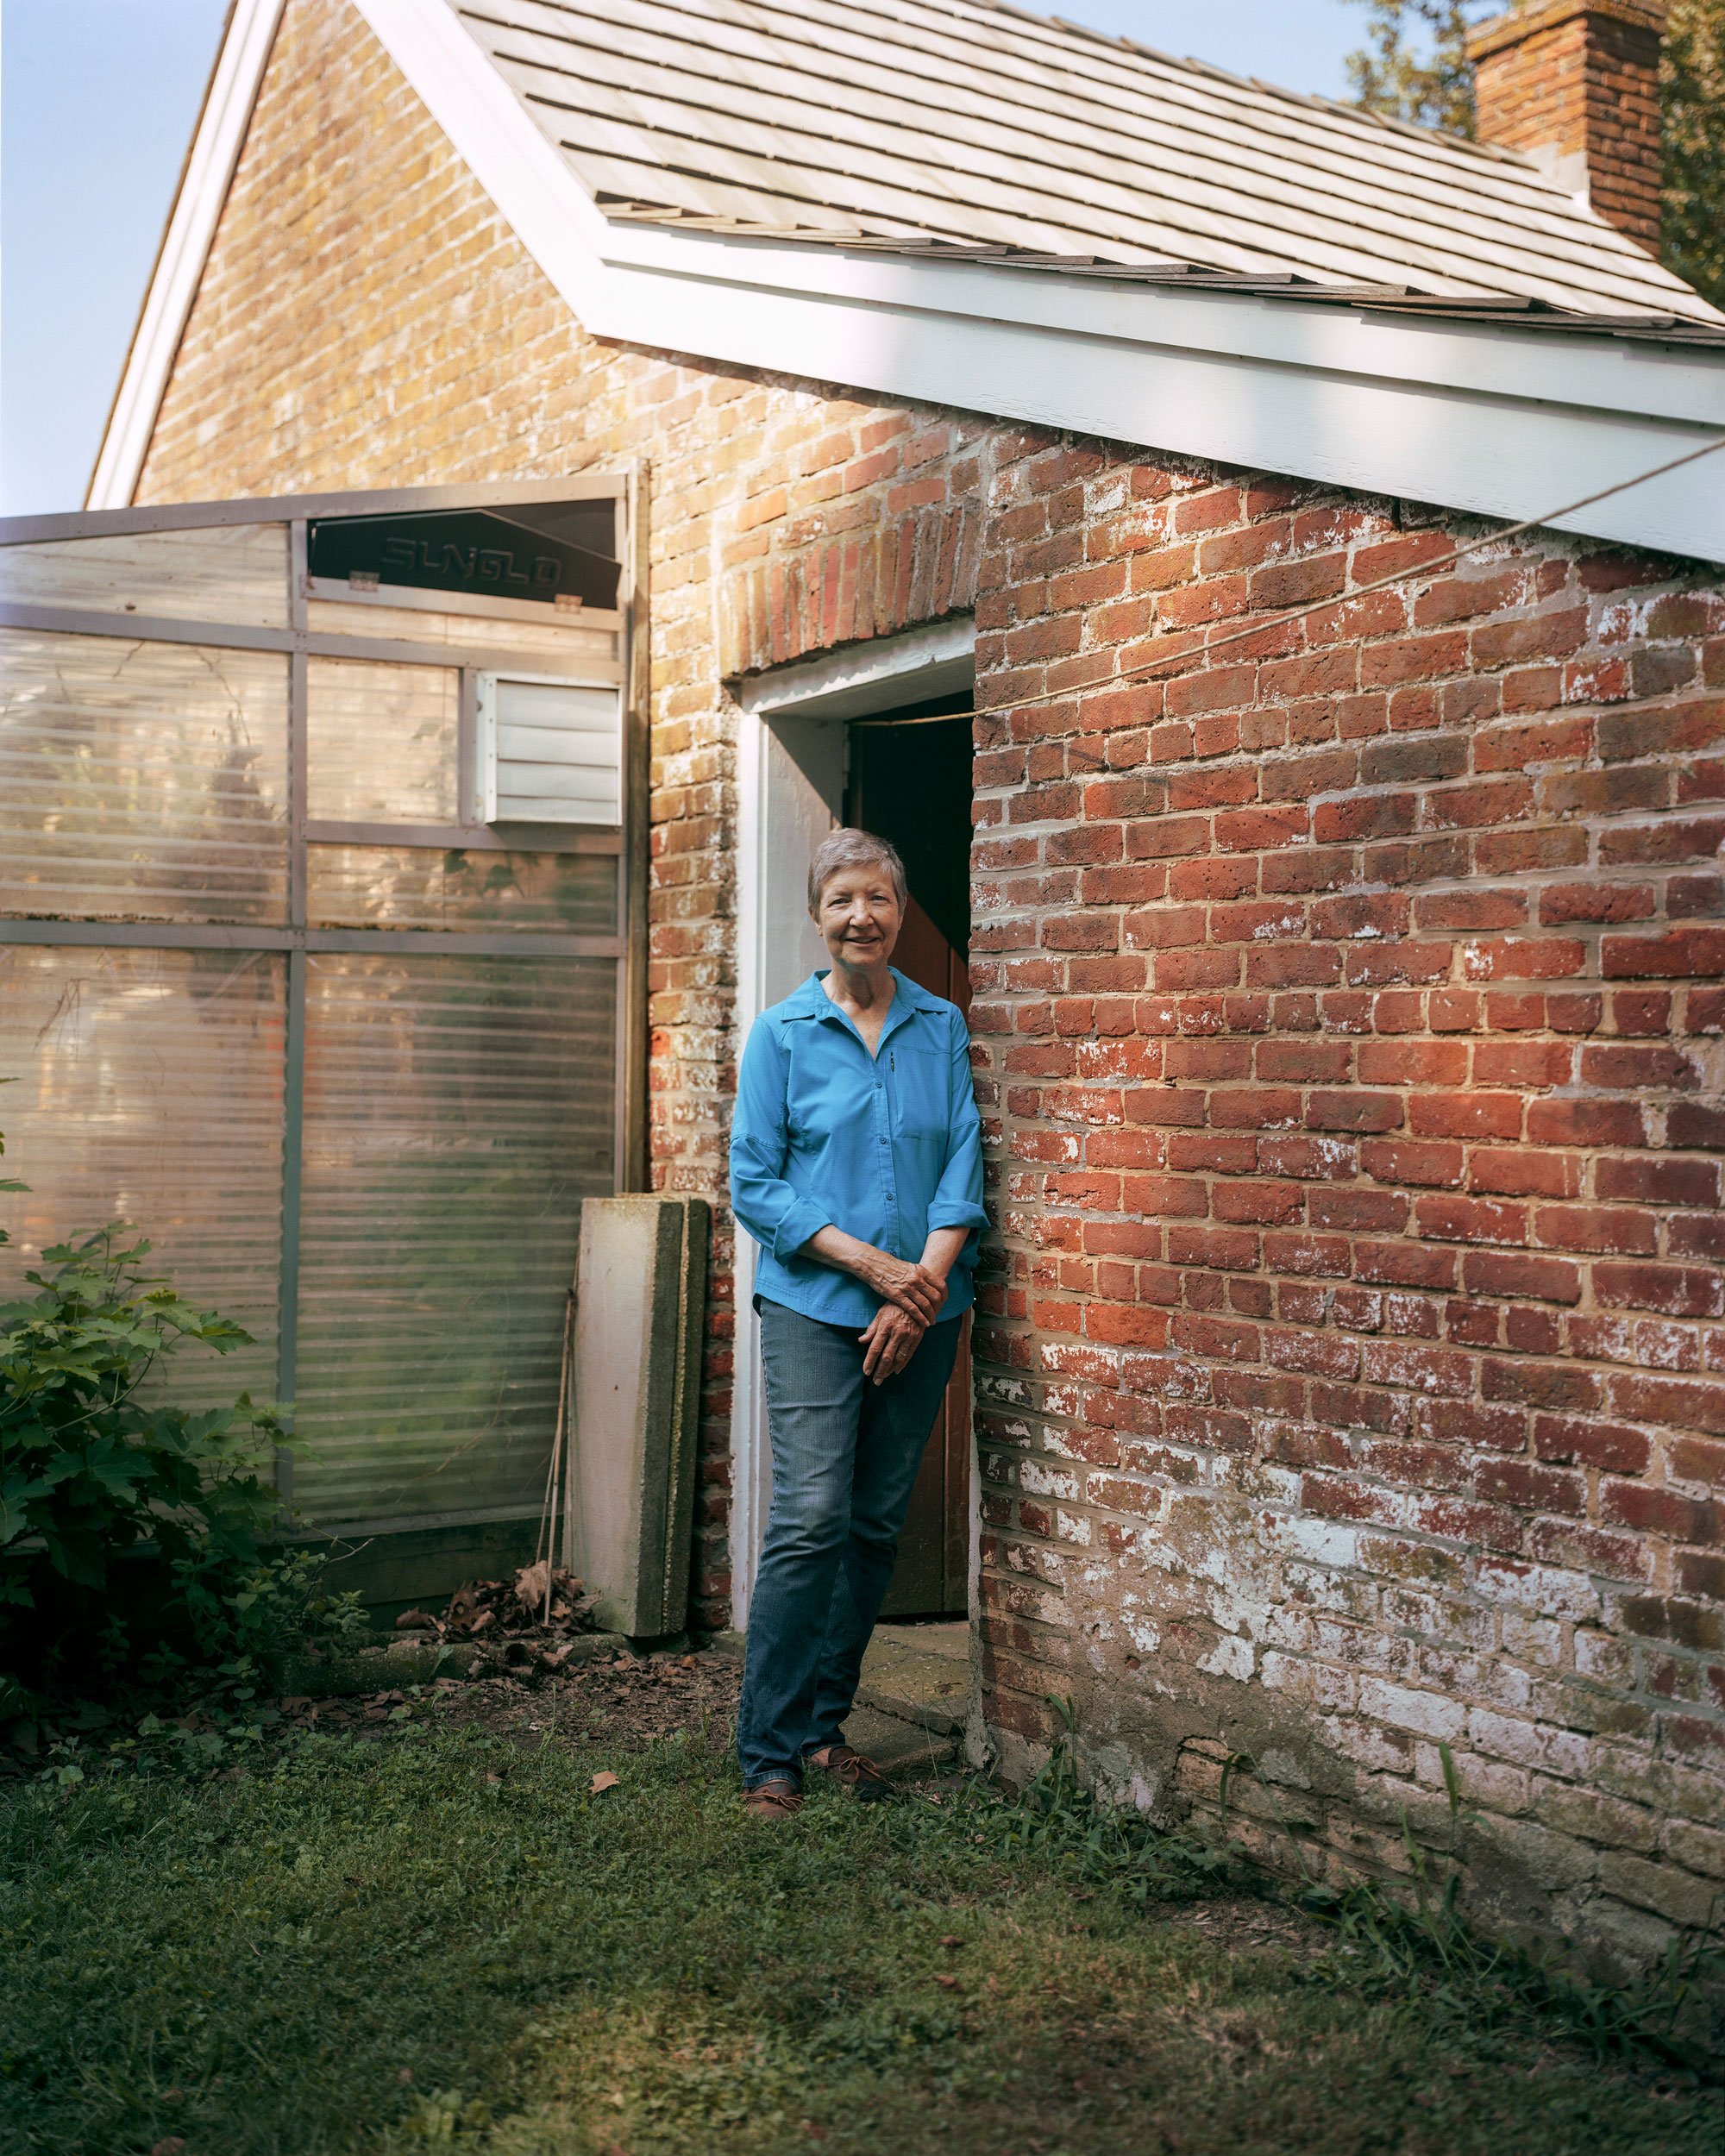 Anne stands in a doorway to the old smokehouse